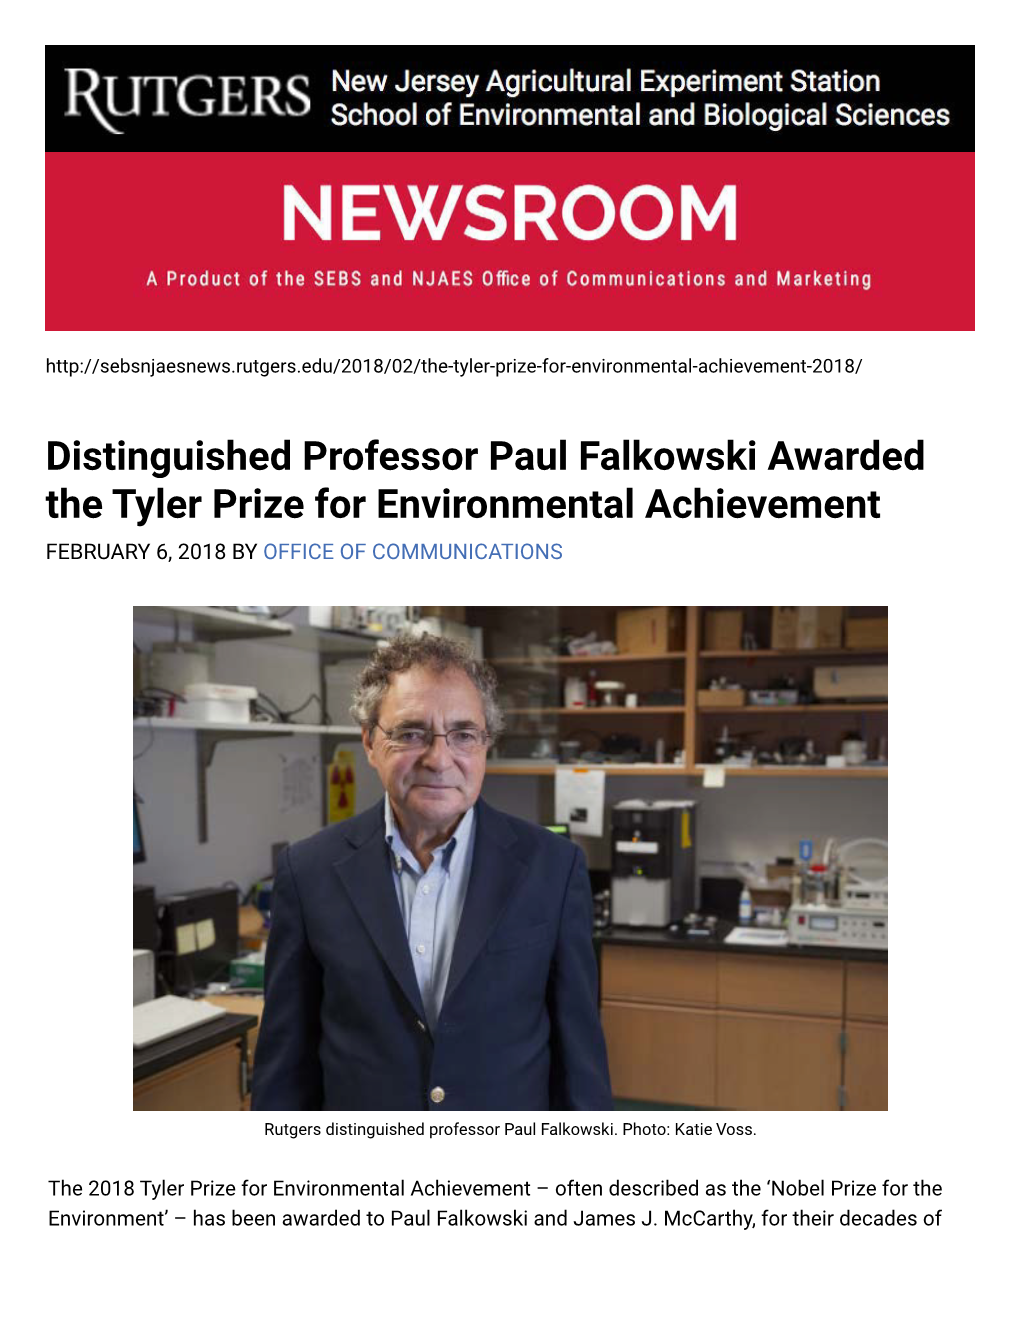 Distinguished Professor Paul Falkowski Awarded the Tyler Prize for Environmental Achievement FEBRUARY 6, 2018 by OFFICE of COMMUNICATIONS